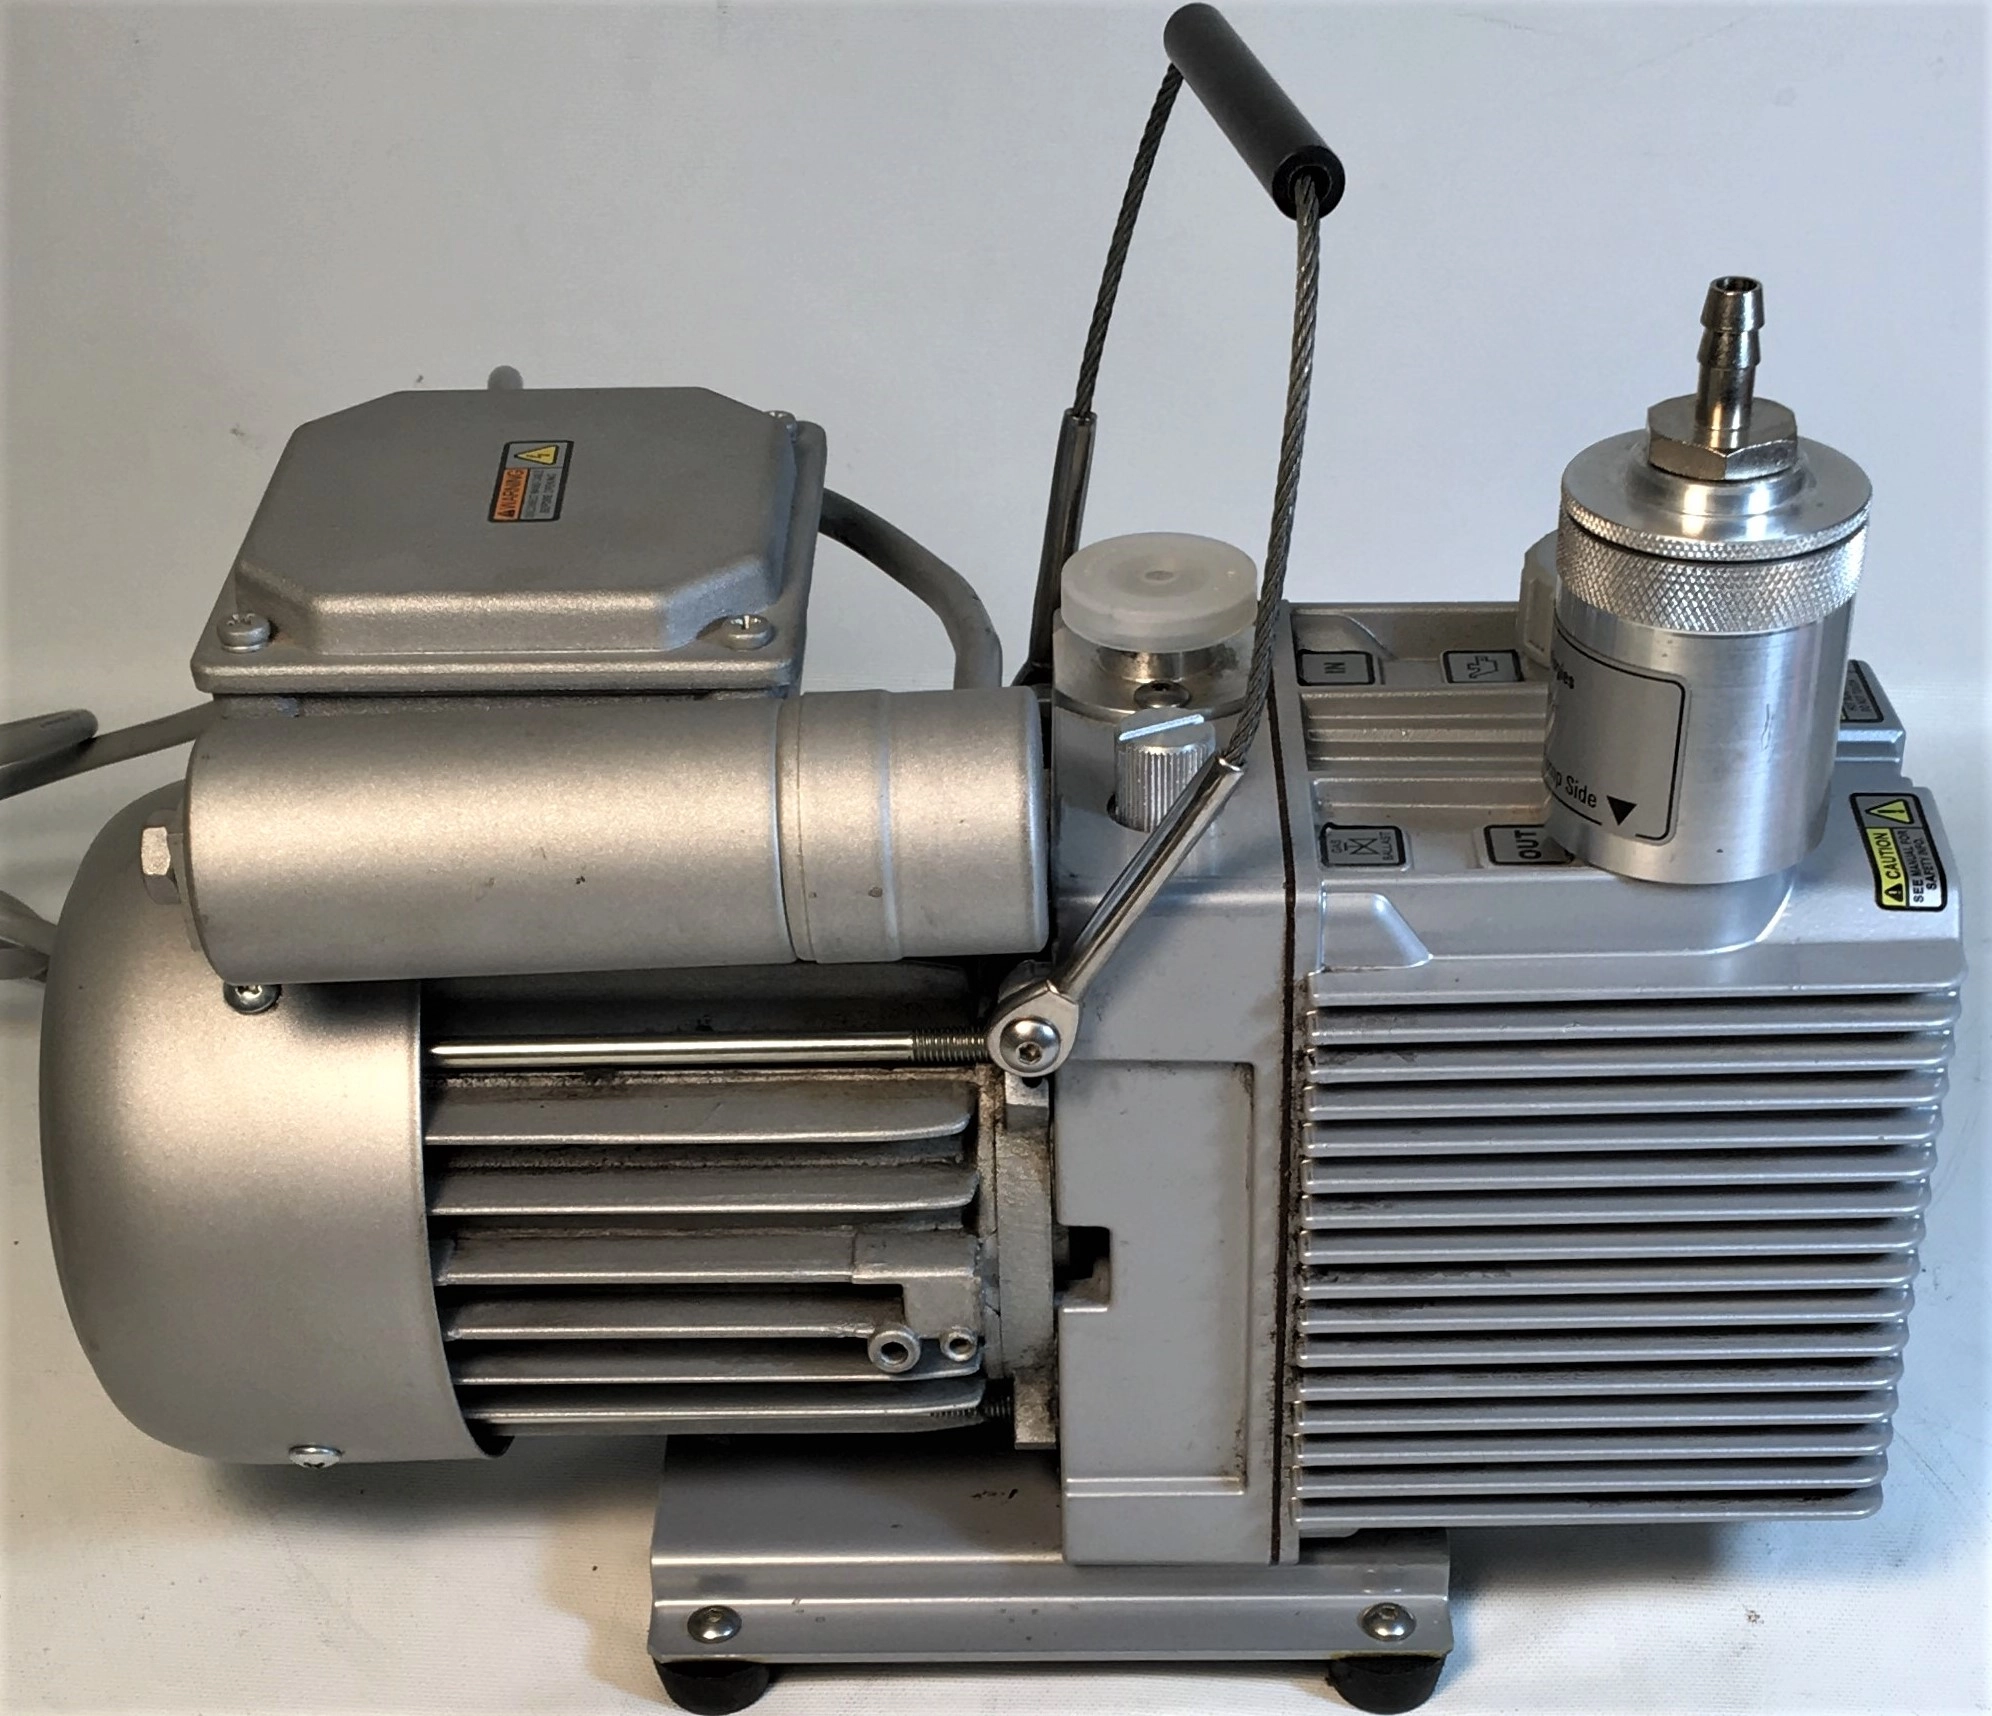 Agilent DS 42 Rotary Vacuum Pump with Oil Exhaust Filter (1.2cfm)